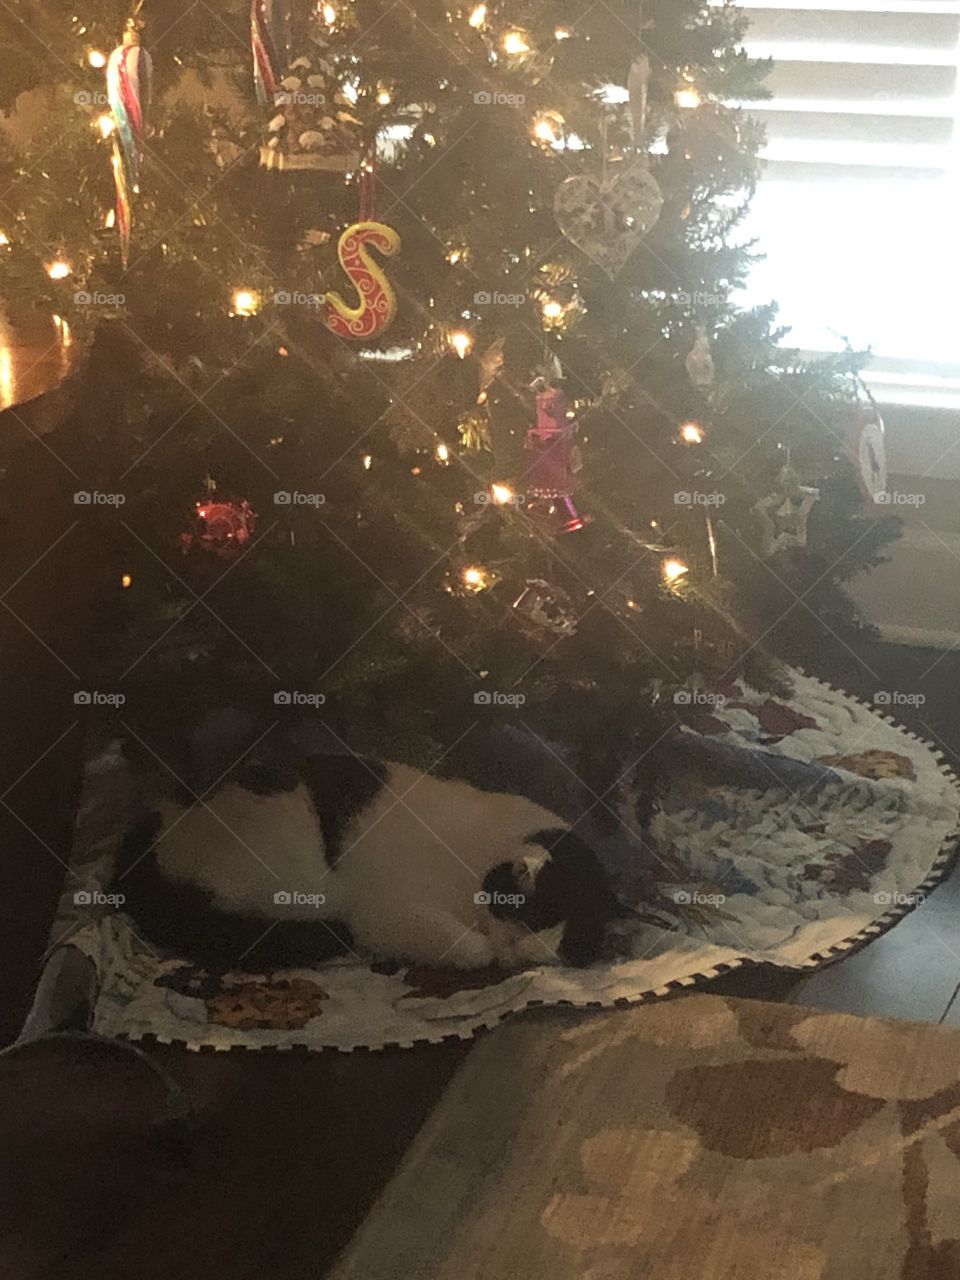 Tuckered out after helping decorate